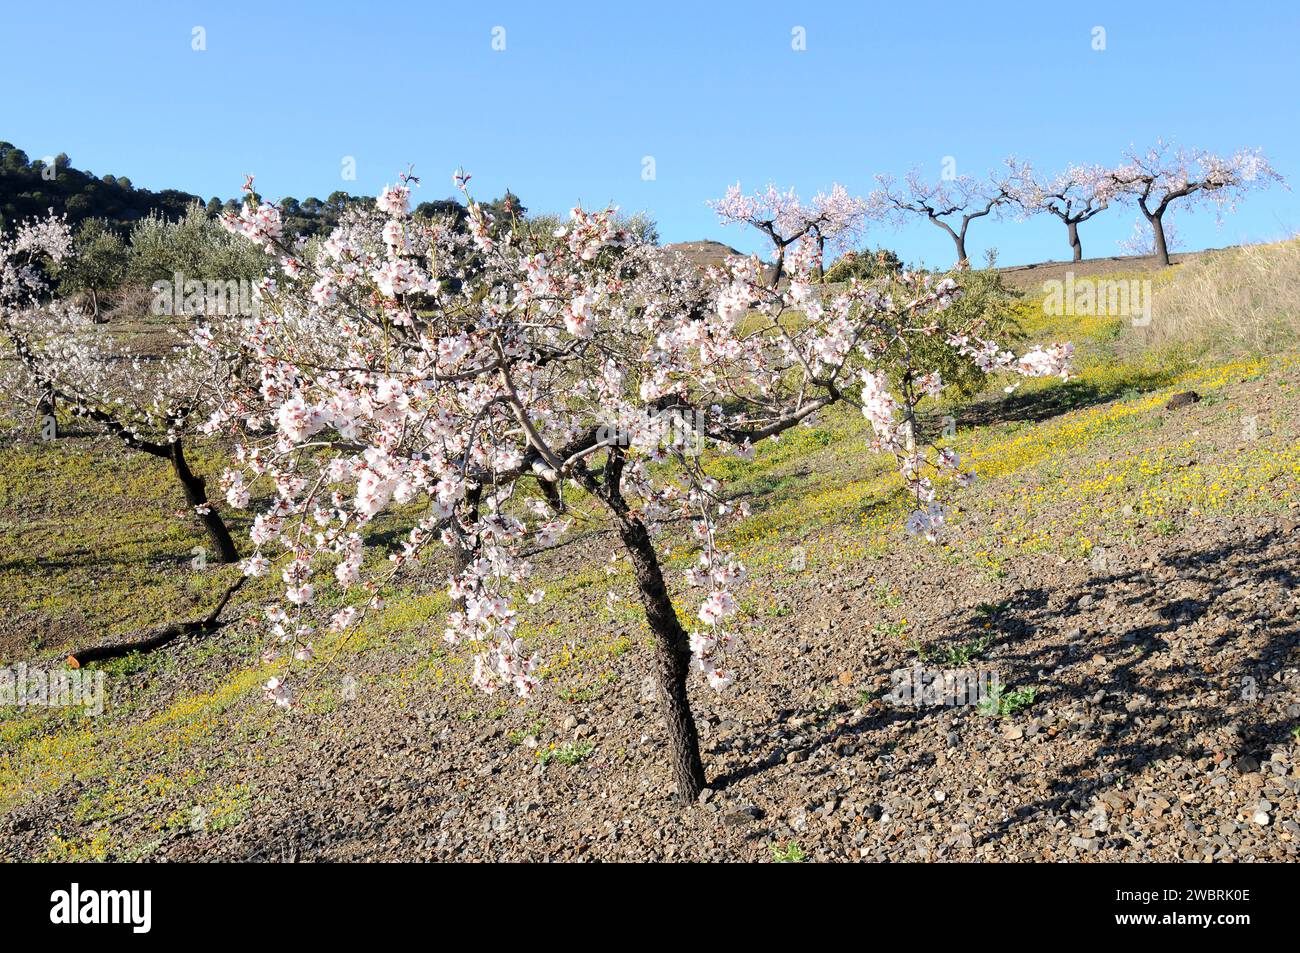 Almond (Prunus dulcis or Prunus amygdalus) is a deciduous tree native to Asia from Turkey to India but widely cultivated for its edible fruits (drupes Stock Photo